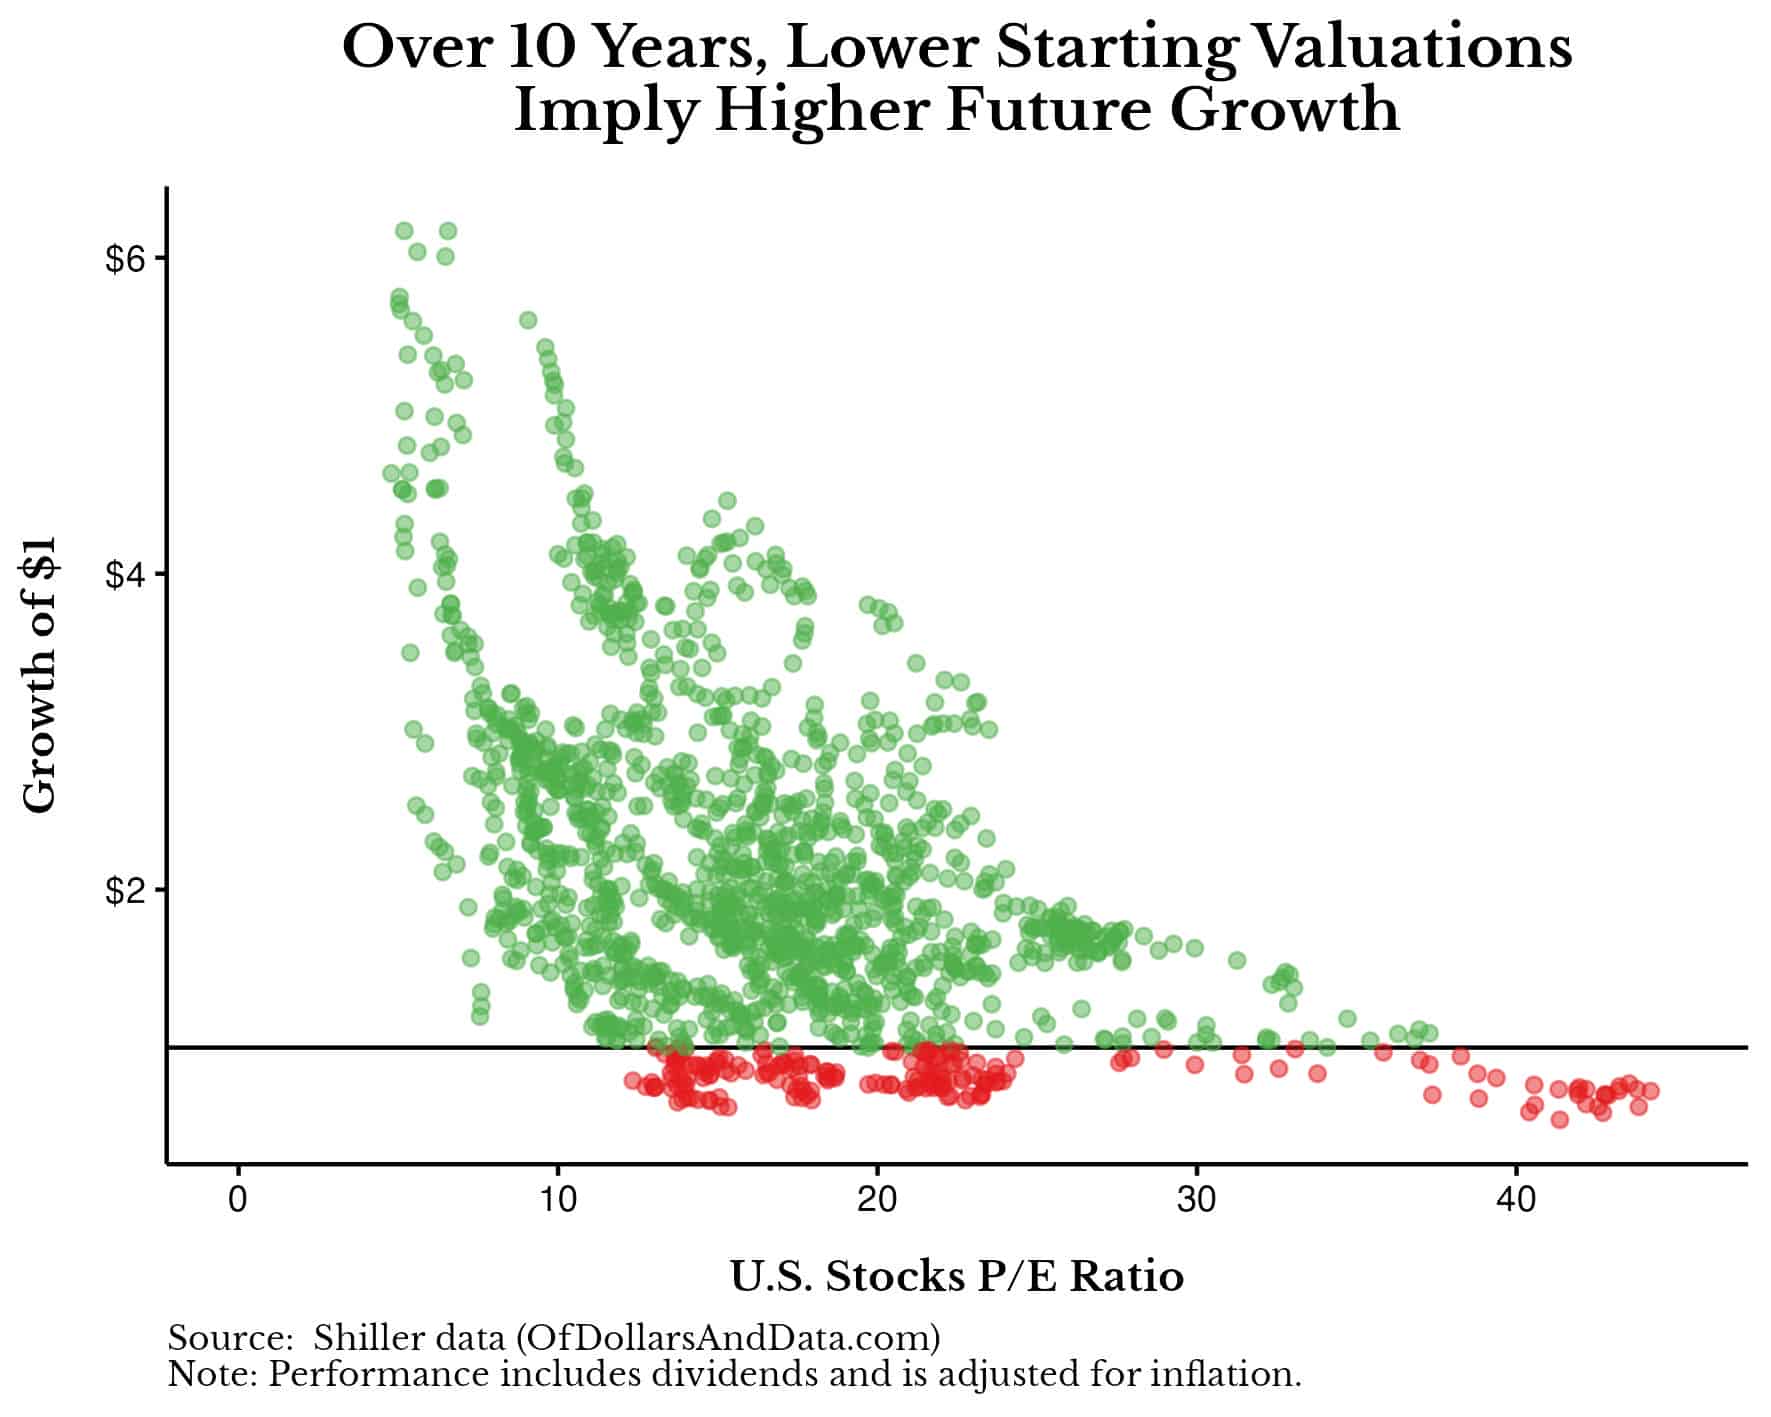 Chart of the growth of $1 in U.S. stocks over the next 10 years against Shiller's CAPE ratio since 1920.